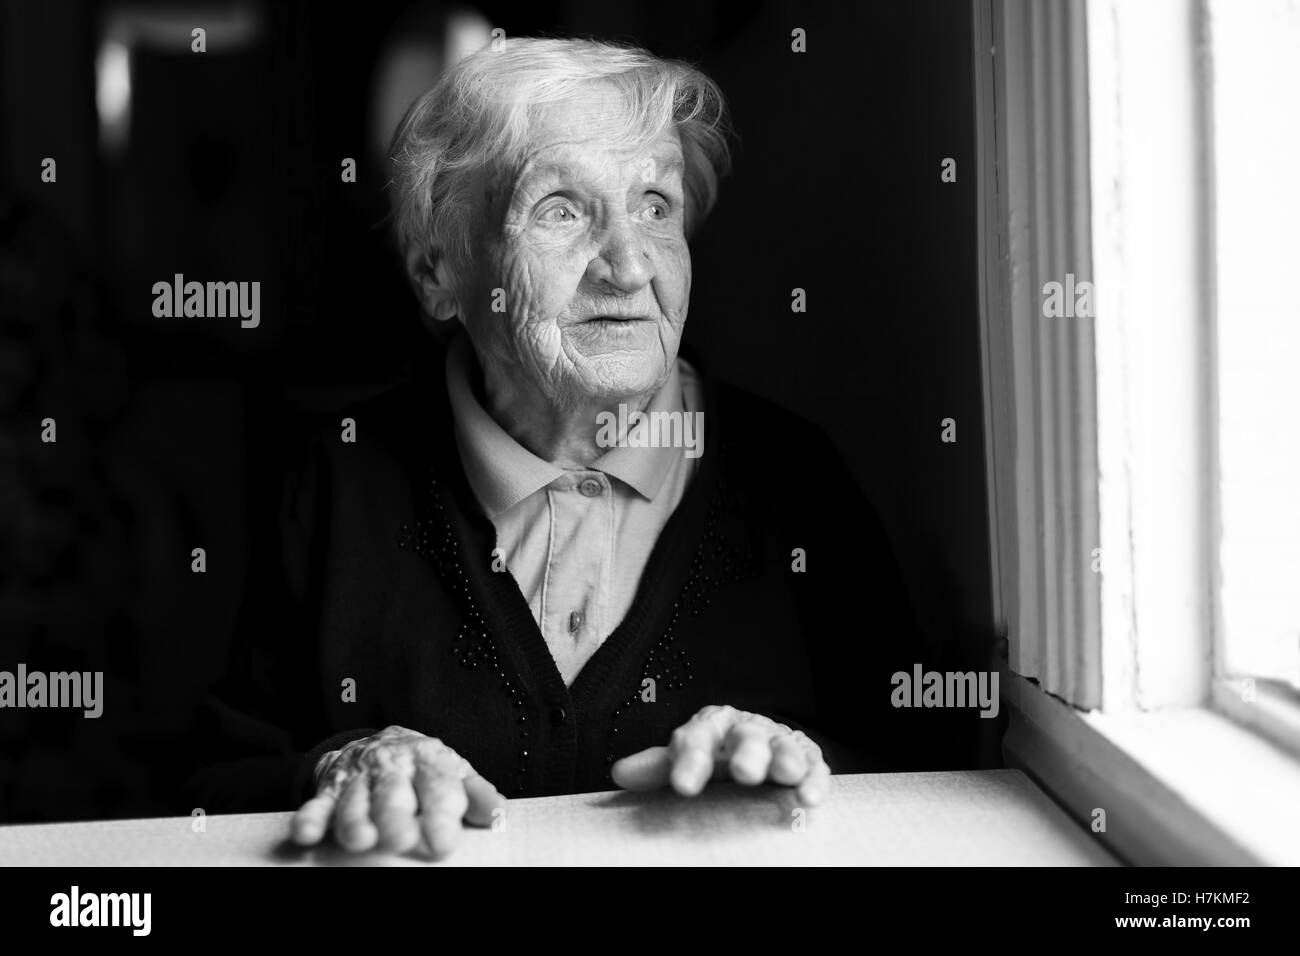 An elderly woman stares out of the window. Black and white photo. Stock Photo